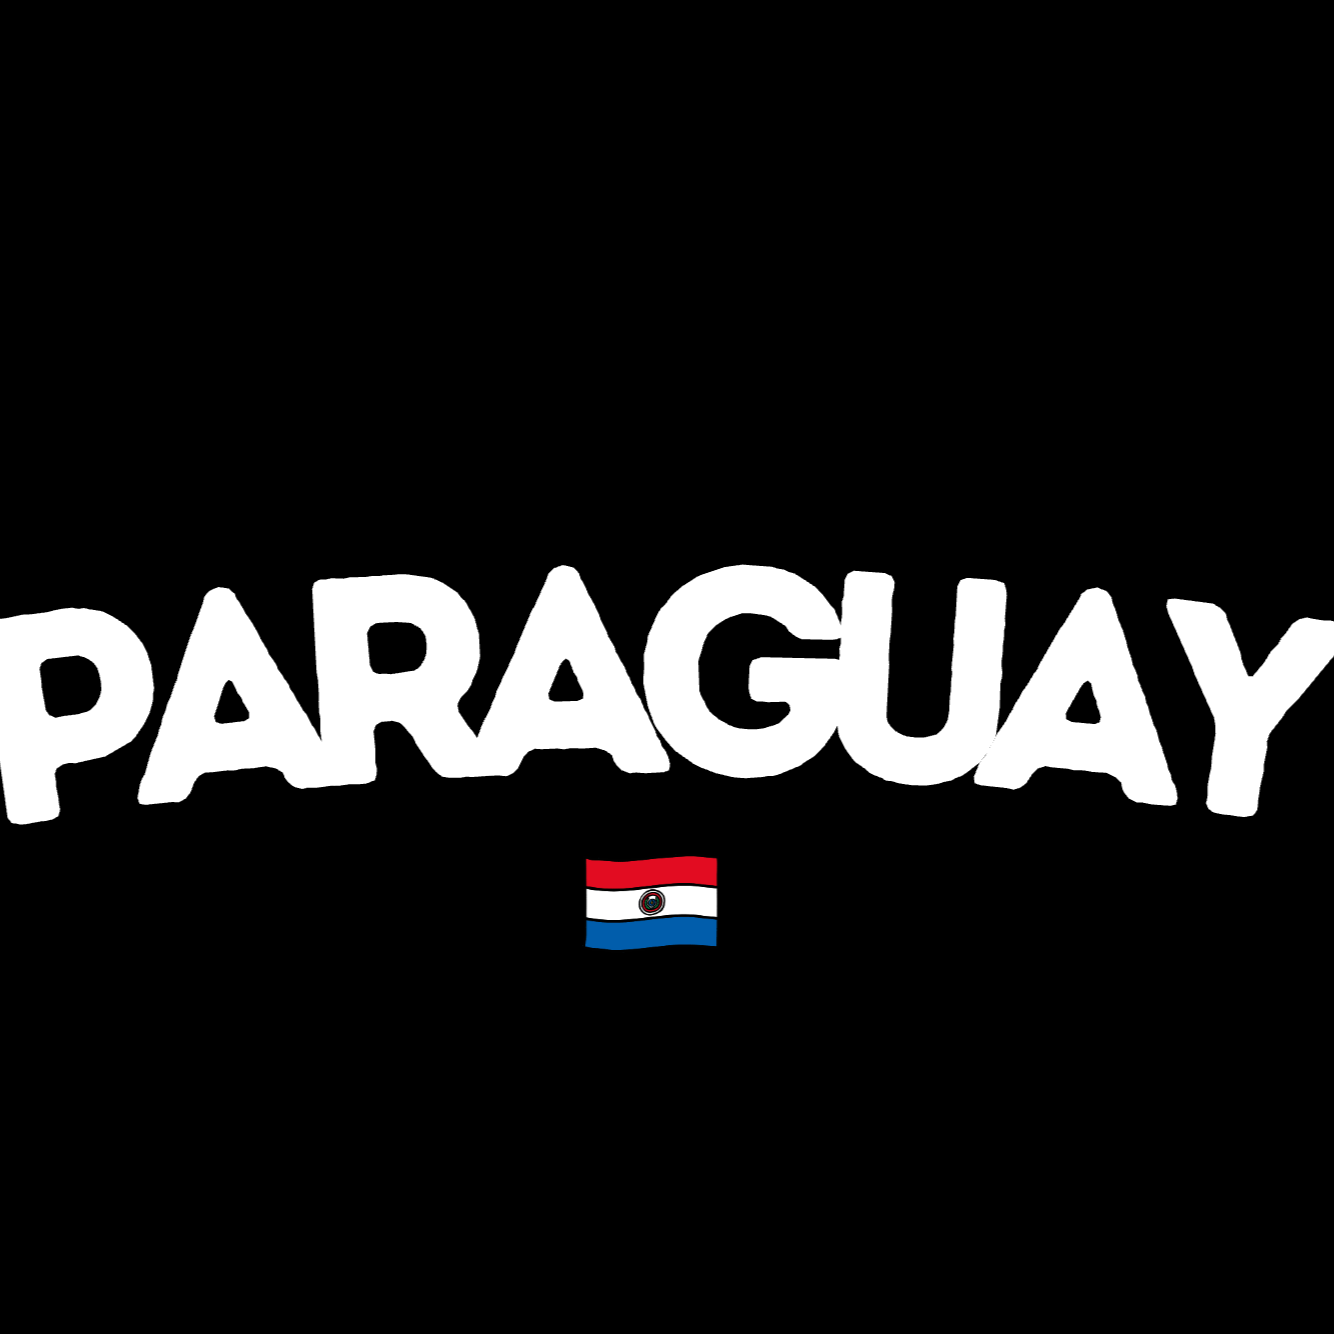 🇵🇾 Paraguay (Mujeres)